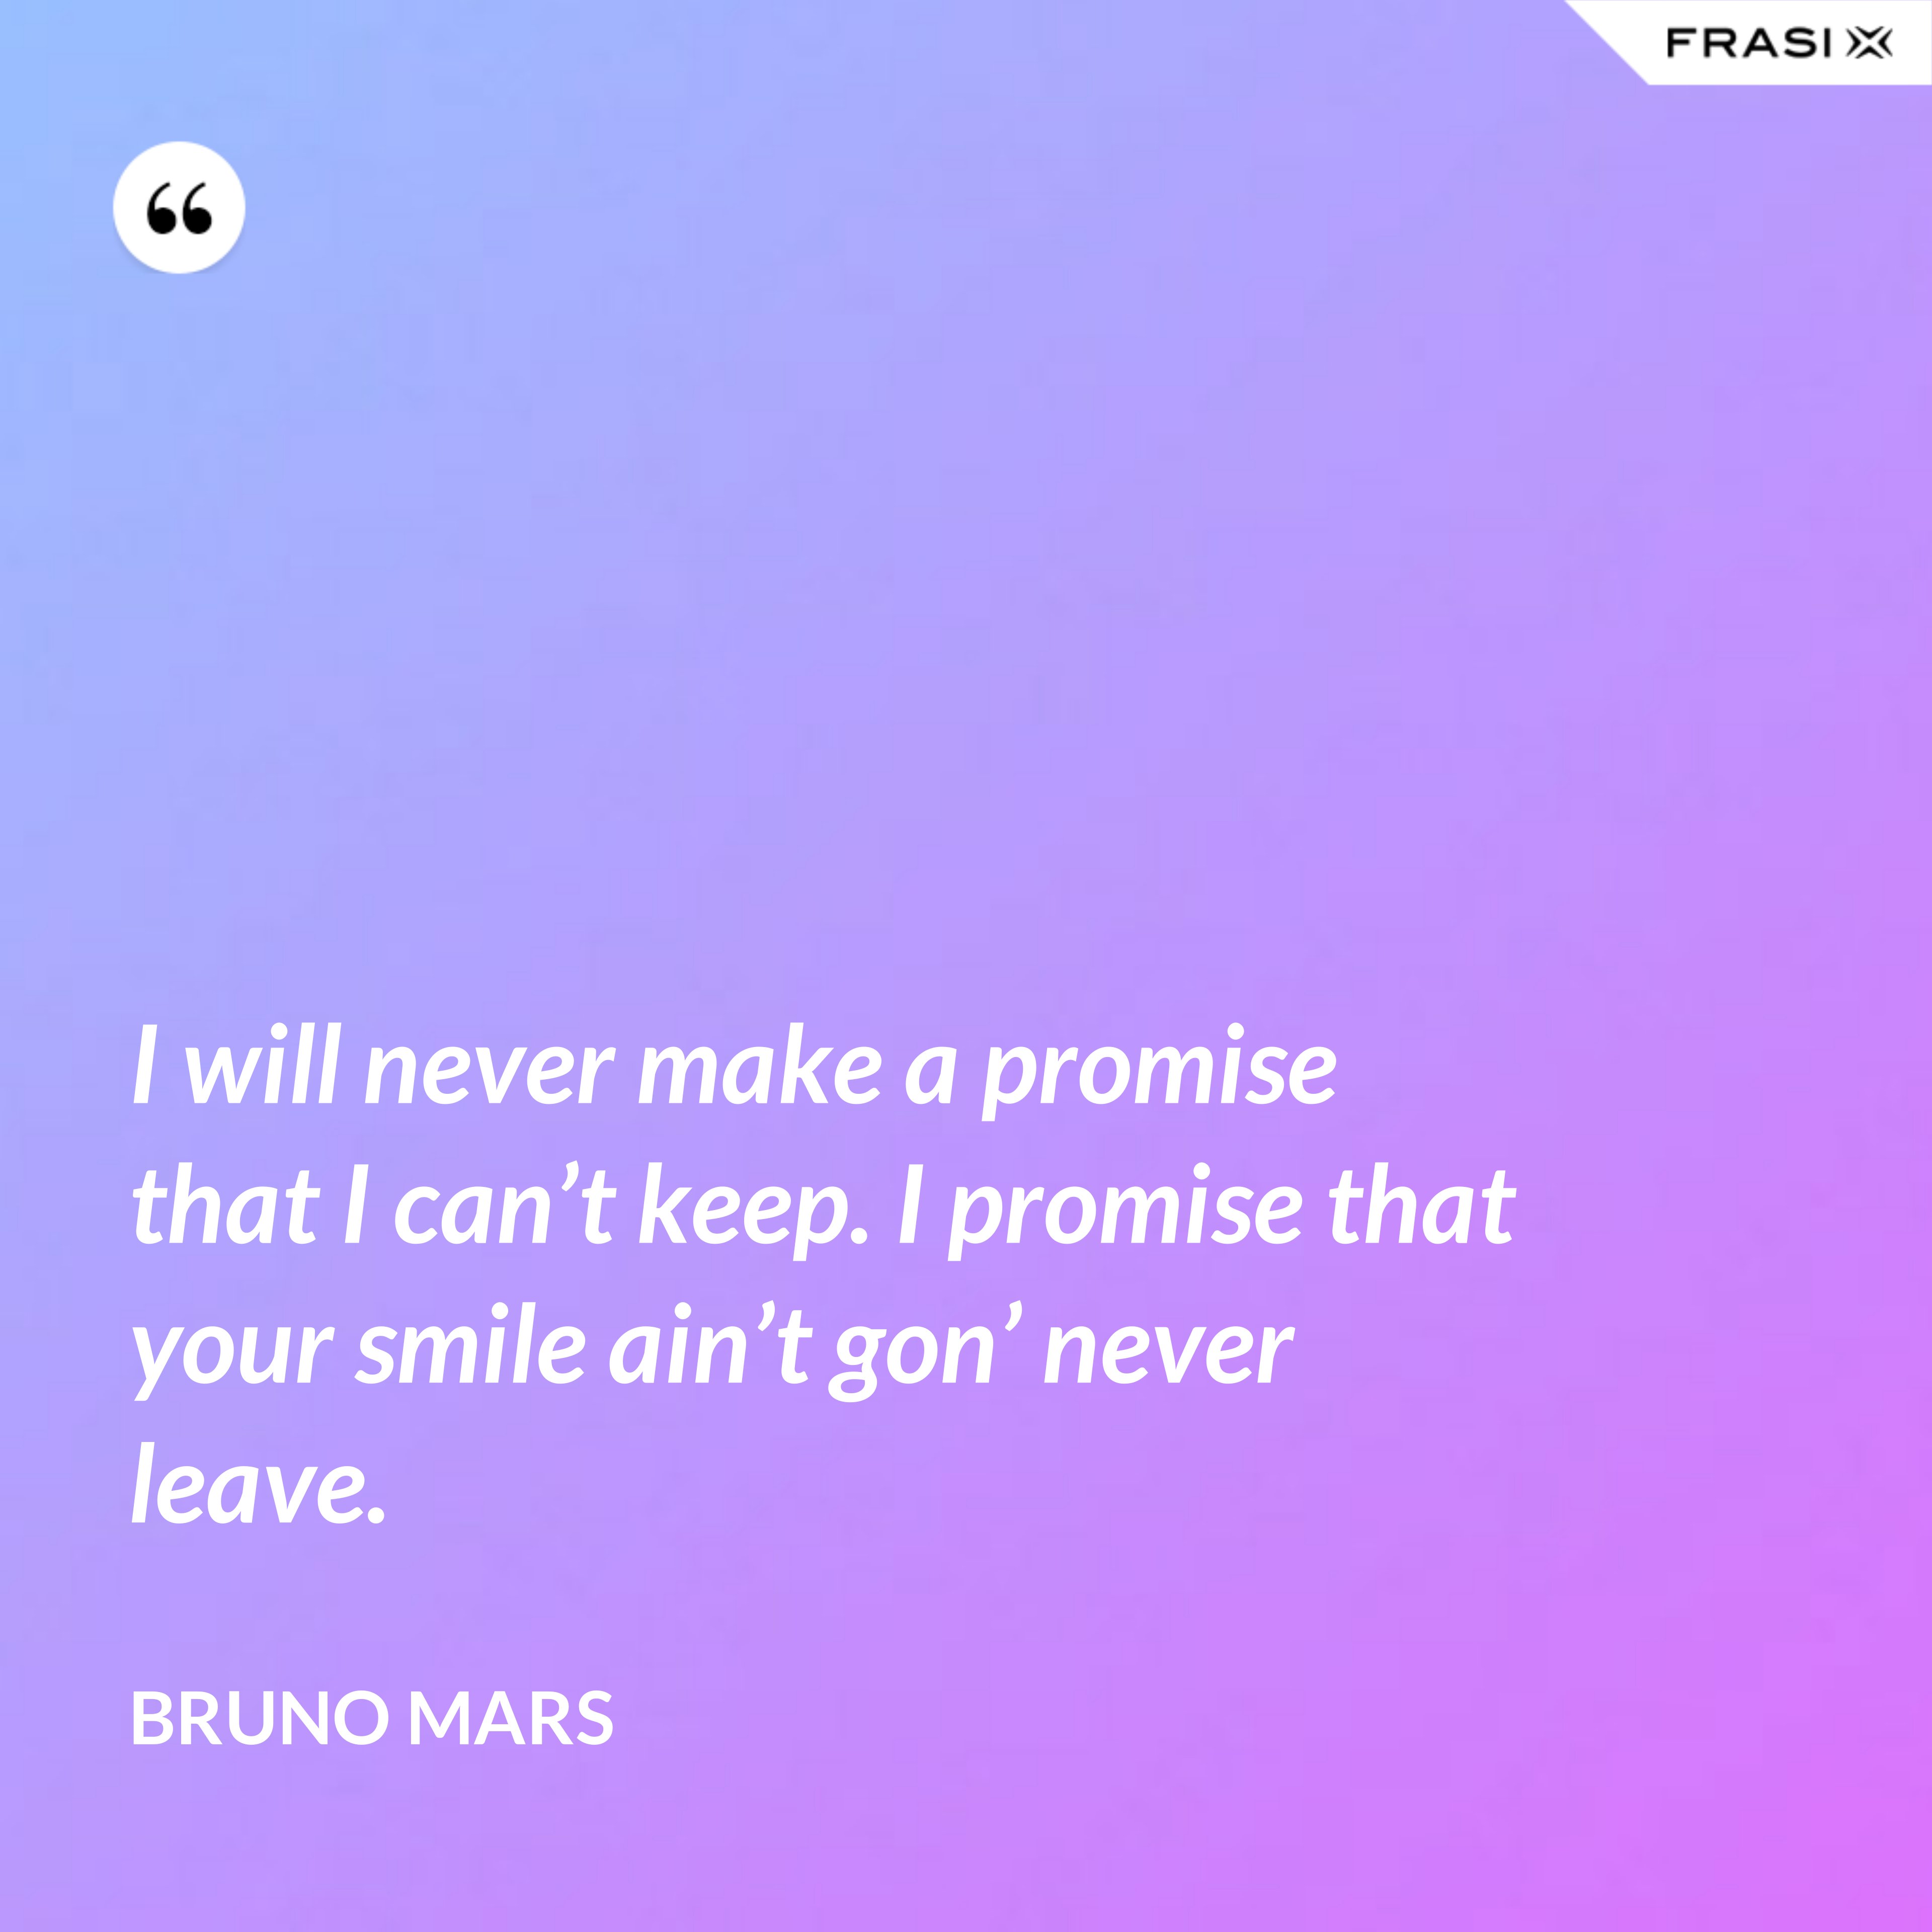 I will never make a promise that I can’t keep. I promise that your smile ain’t gon’ never leave. - Bruno Mars